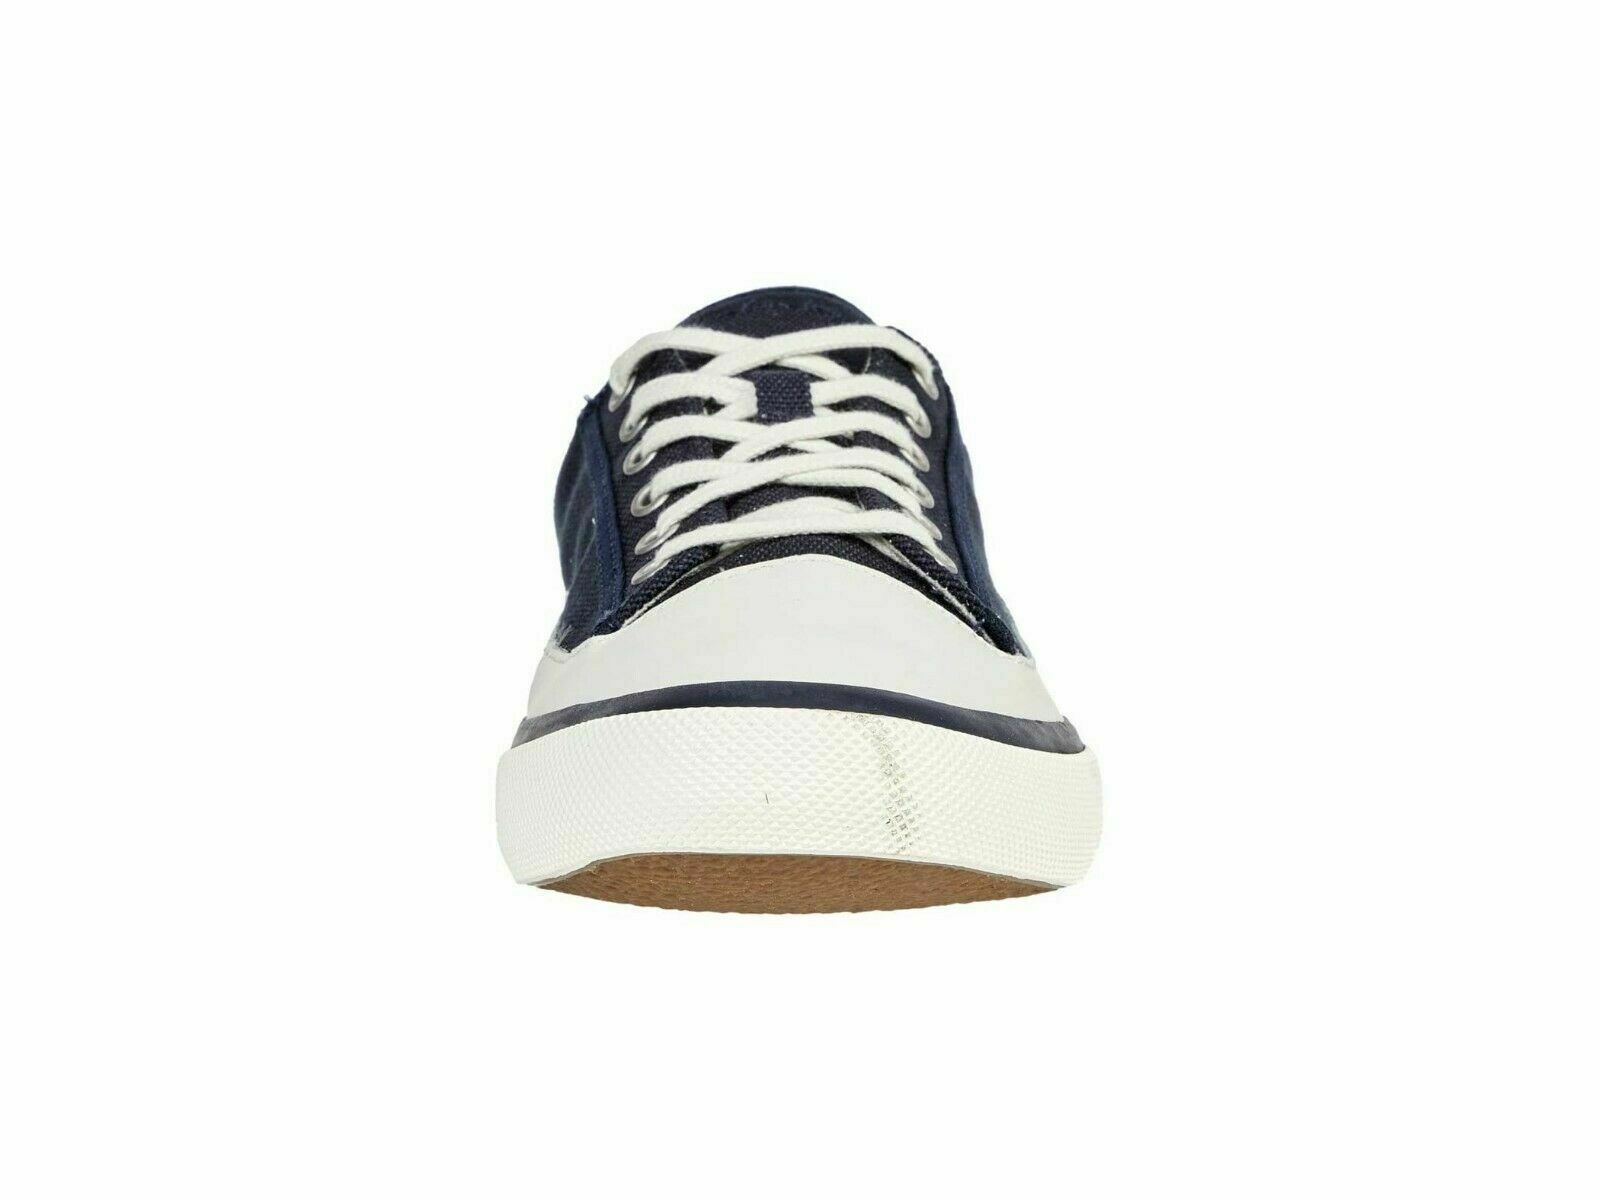 Men's Shoes Clarks ACELEY LACE Casual Lace Up Sneakers 58543 NAVY CANVAS